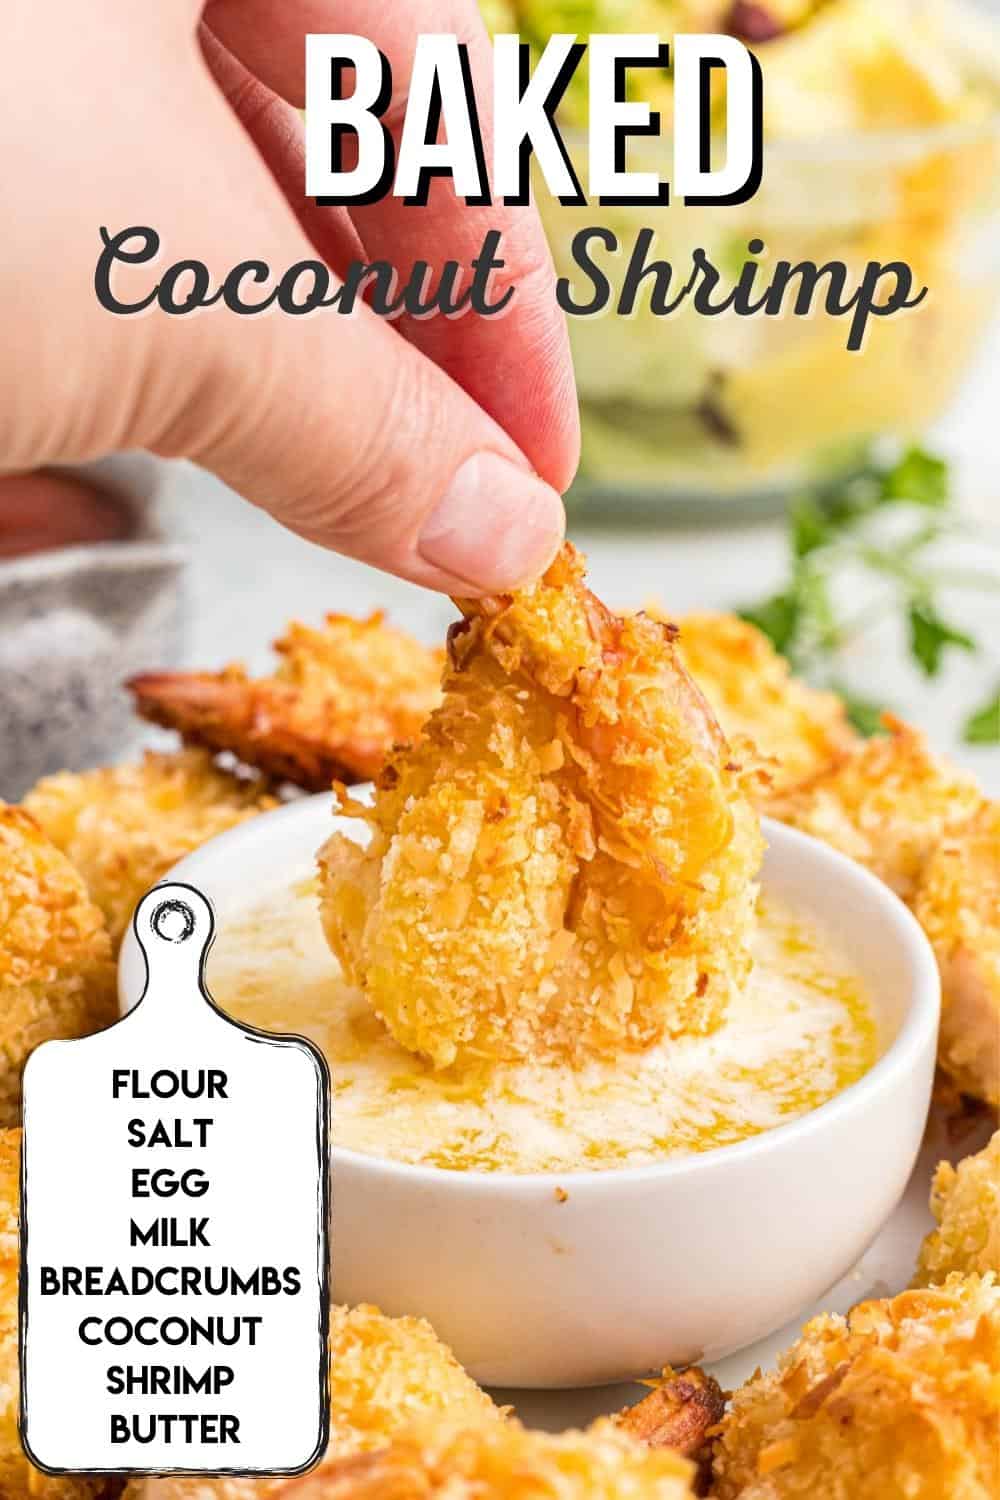 Collage of coconut shrimp with "baked coconut shrimp" overlaid in text.